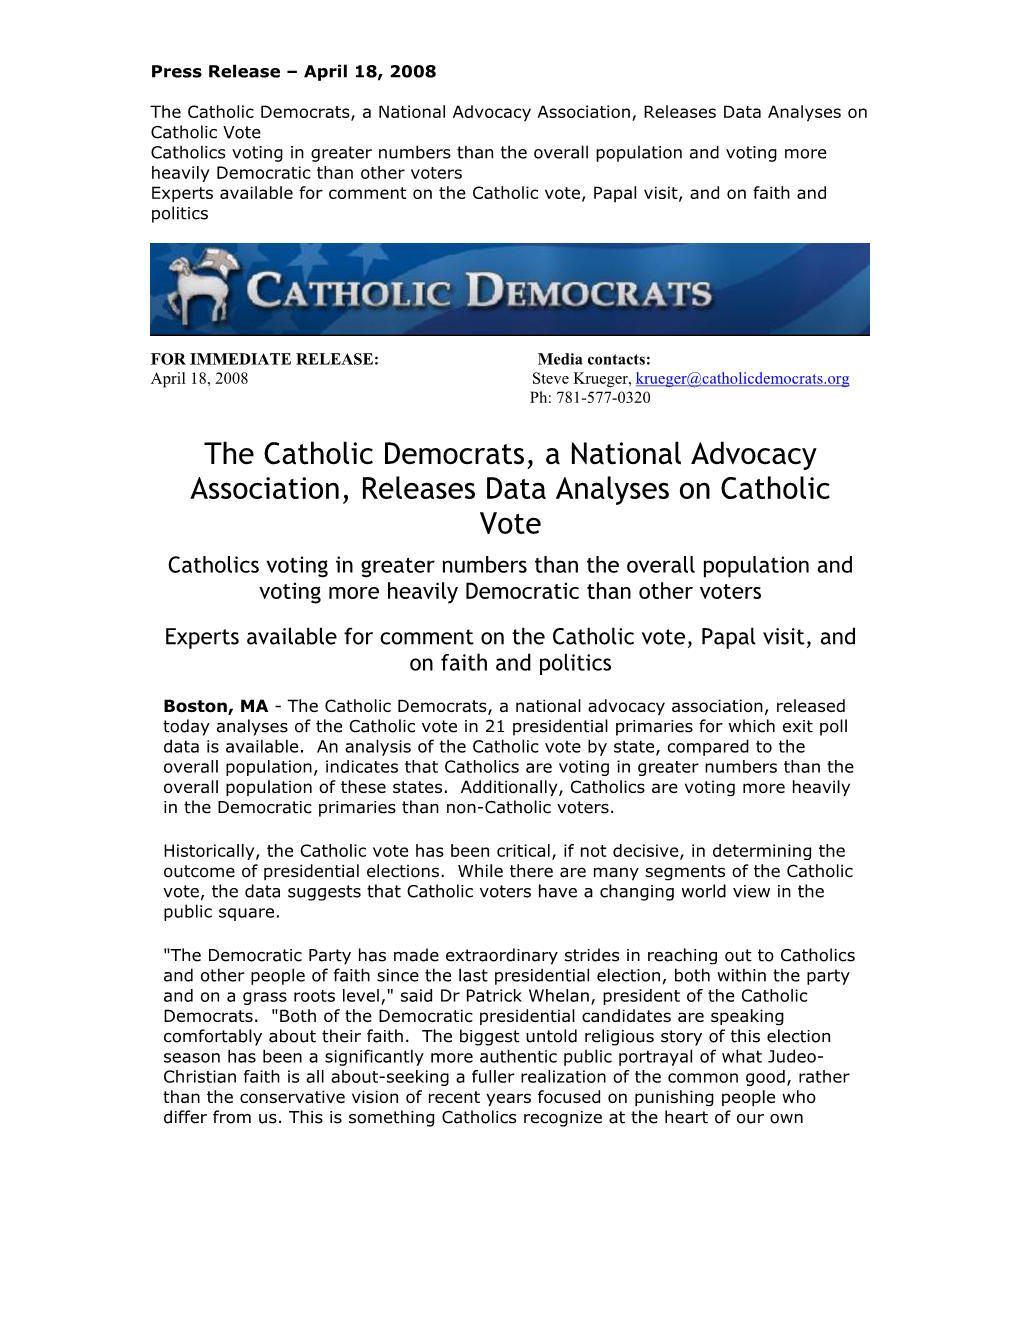 The Catholic Democrats, a National Advocacy Association, Releases